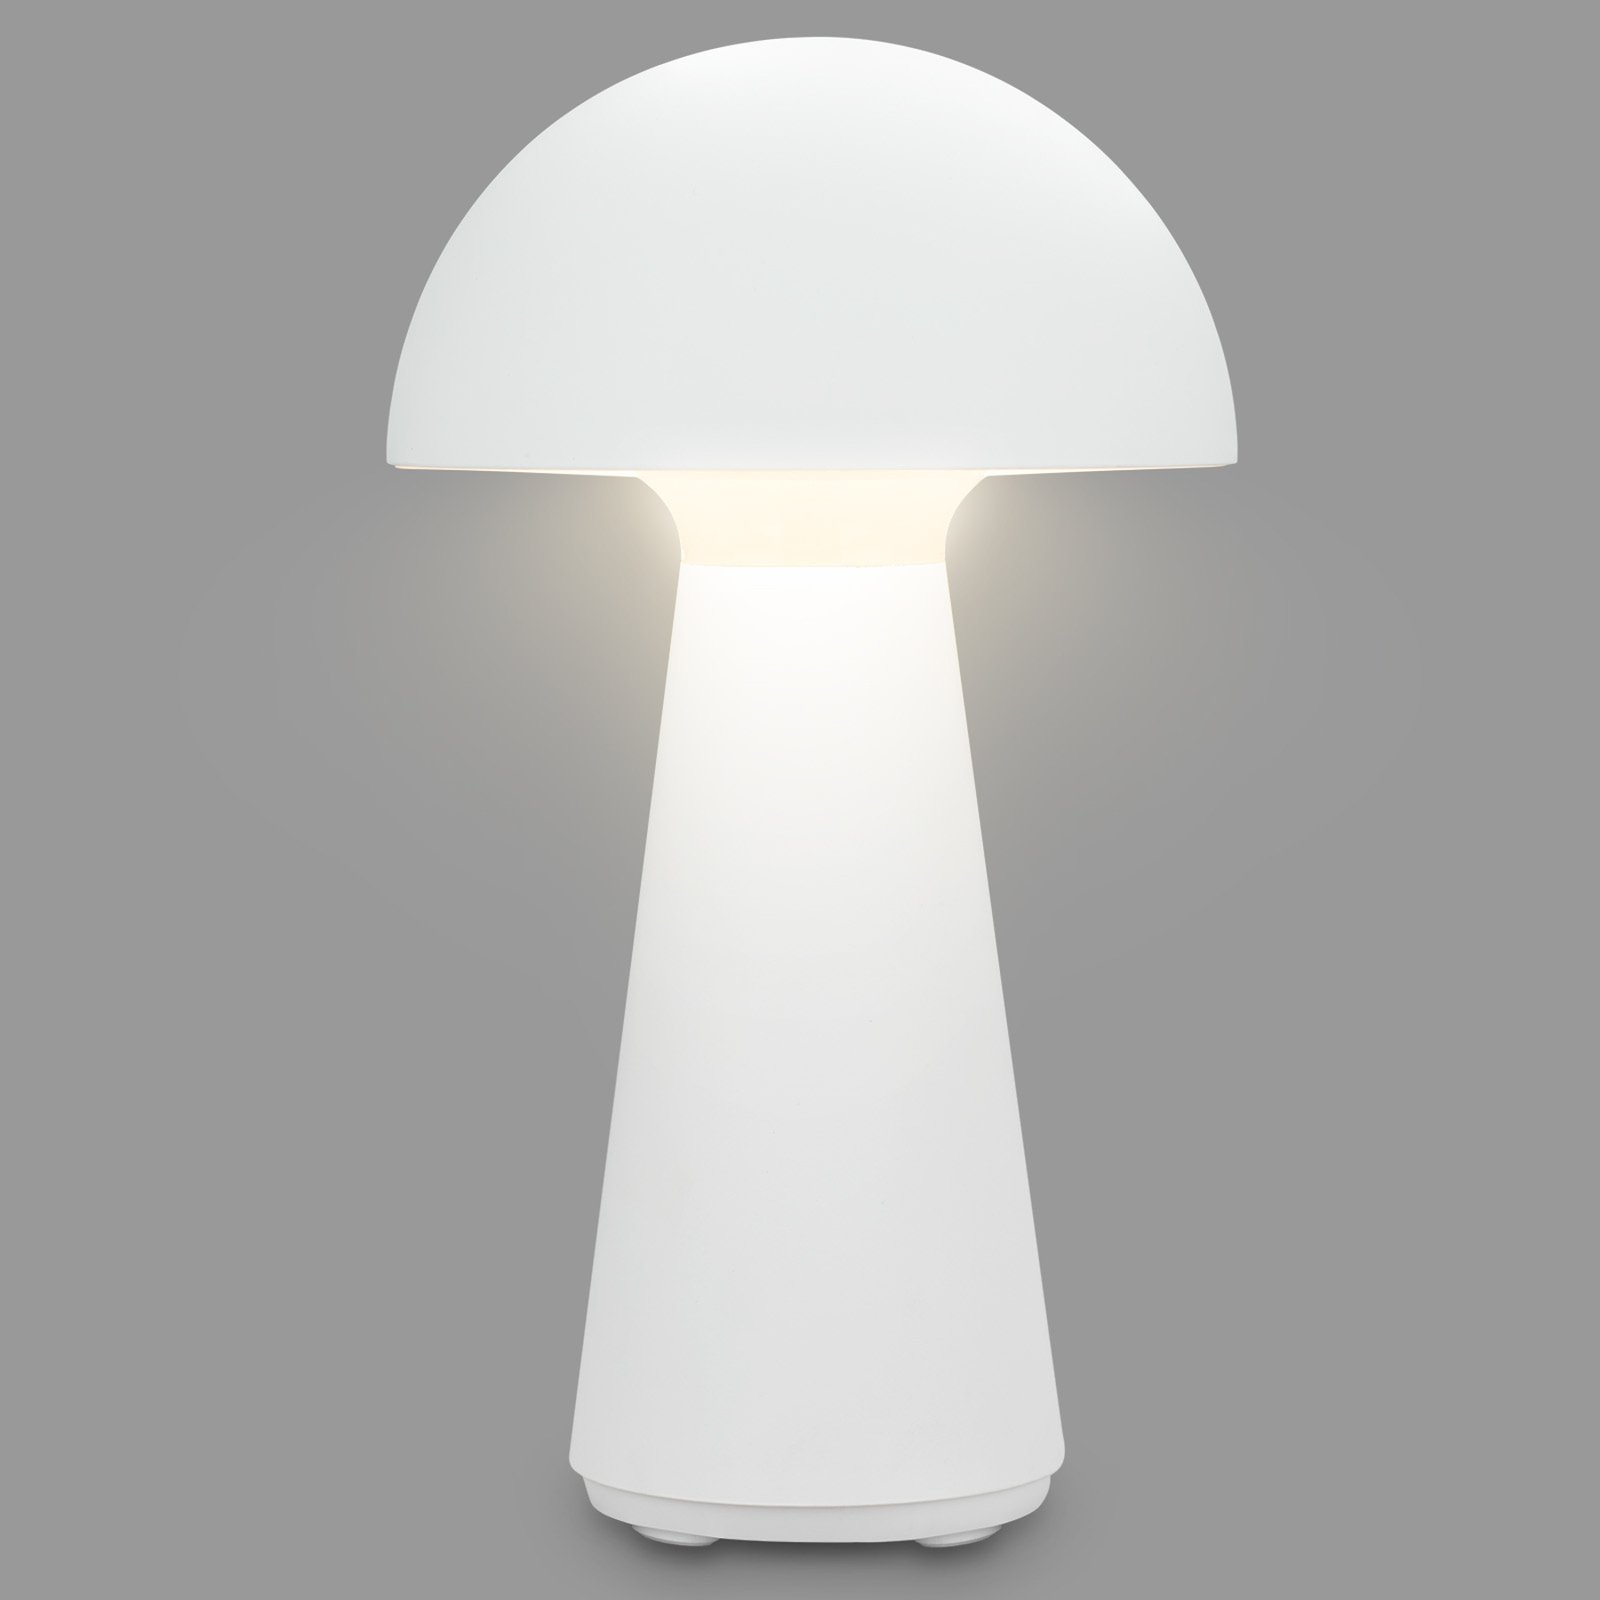 LED table lamp Fungo, rechargeable, white